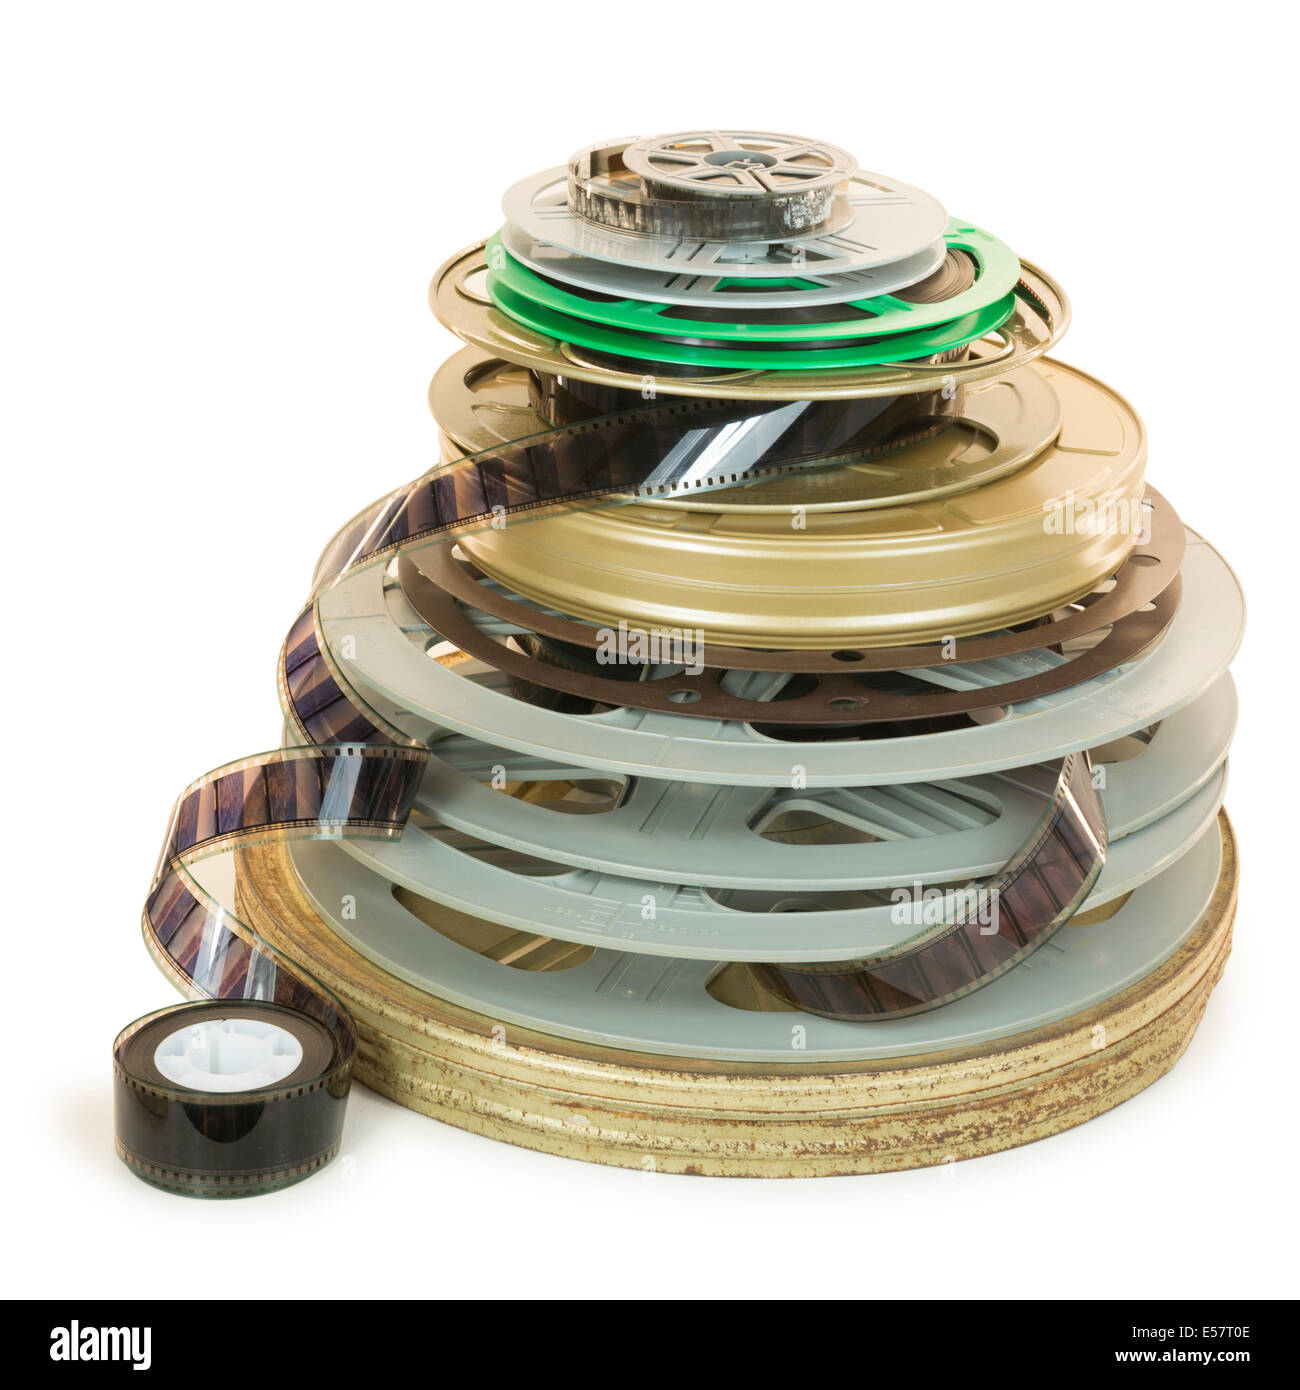 Pile of several types of movie film reels (35mm, 16mm, 8mm) and